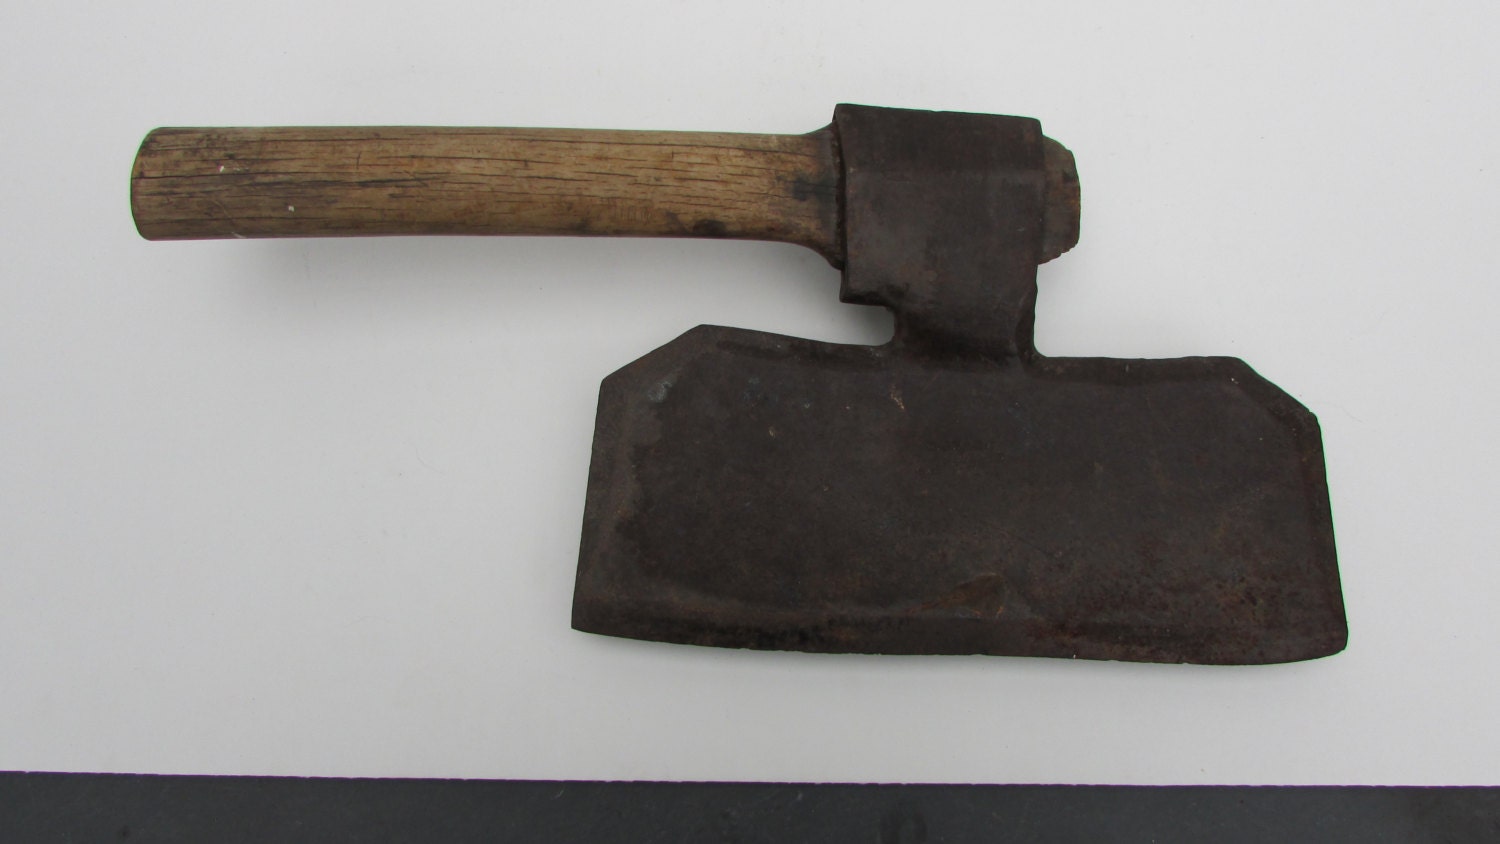 Antique short handled broad axe 1850's tool woodworking